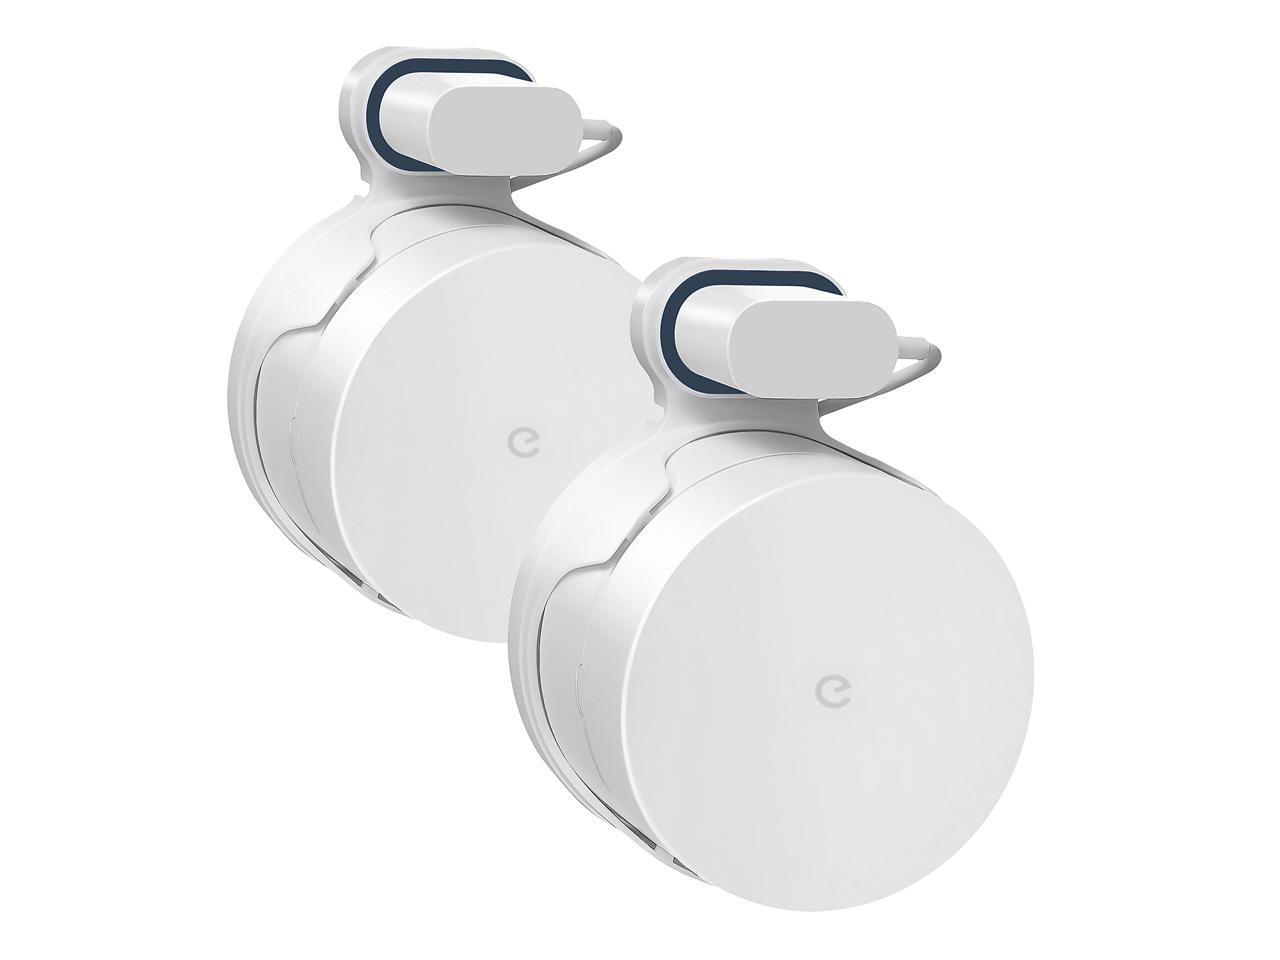 koks Normal Lyn STANSTAR Google WiFi Wall Mount ,WiFi Bracket Holder for Google Mesh WiFi  Router and System Convenient Google WiFi Holder Plug in Without Messy Wires  or Screws(2 Pack) - Newegg.com